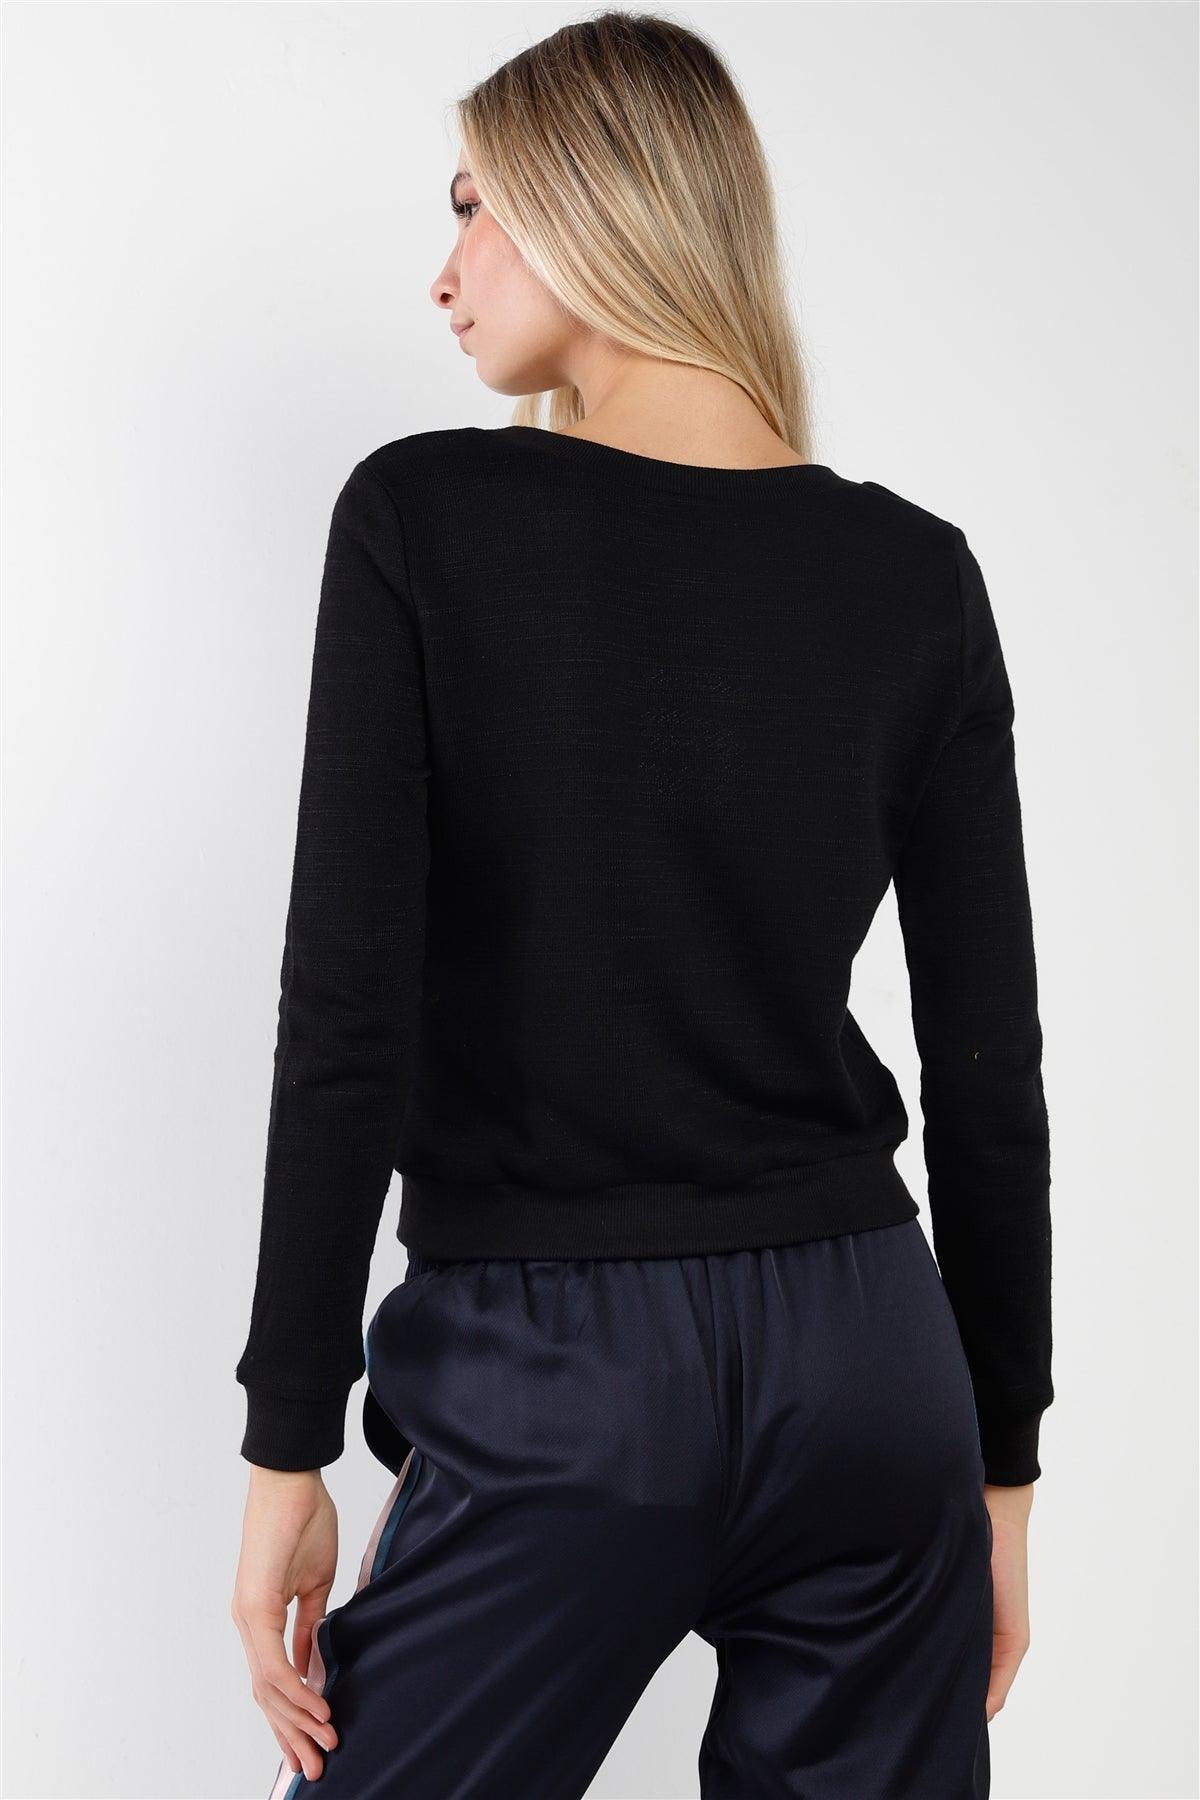 Black Hole & Sequins Knit  Pullover Sweater /3-2-1